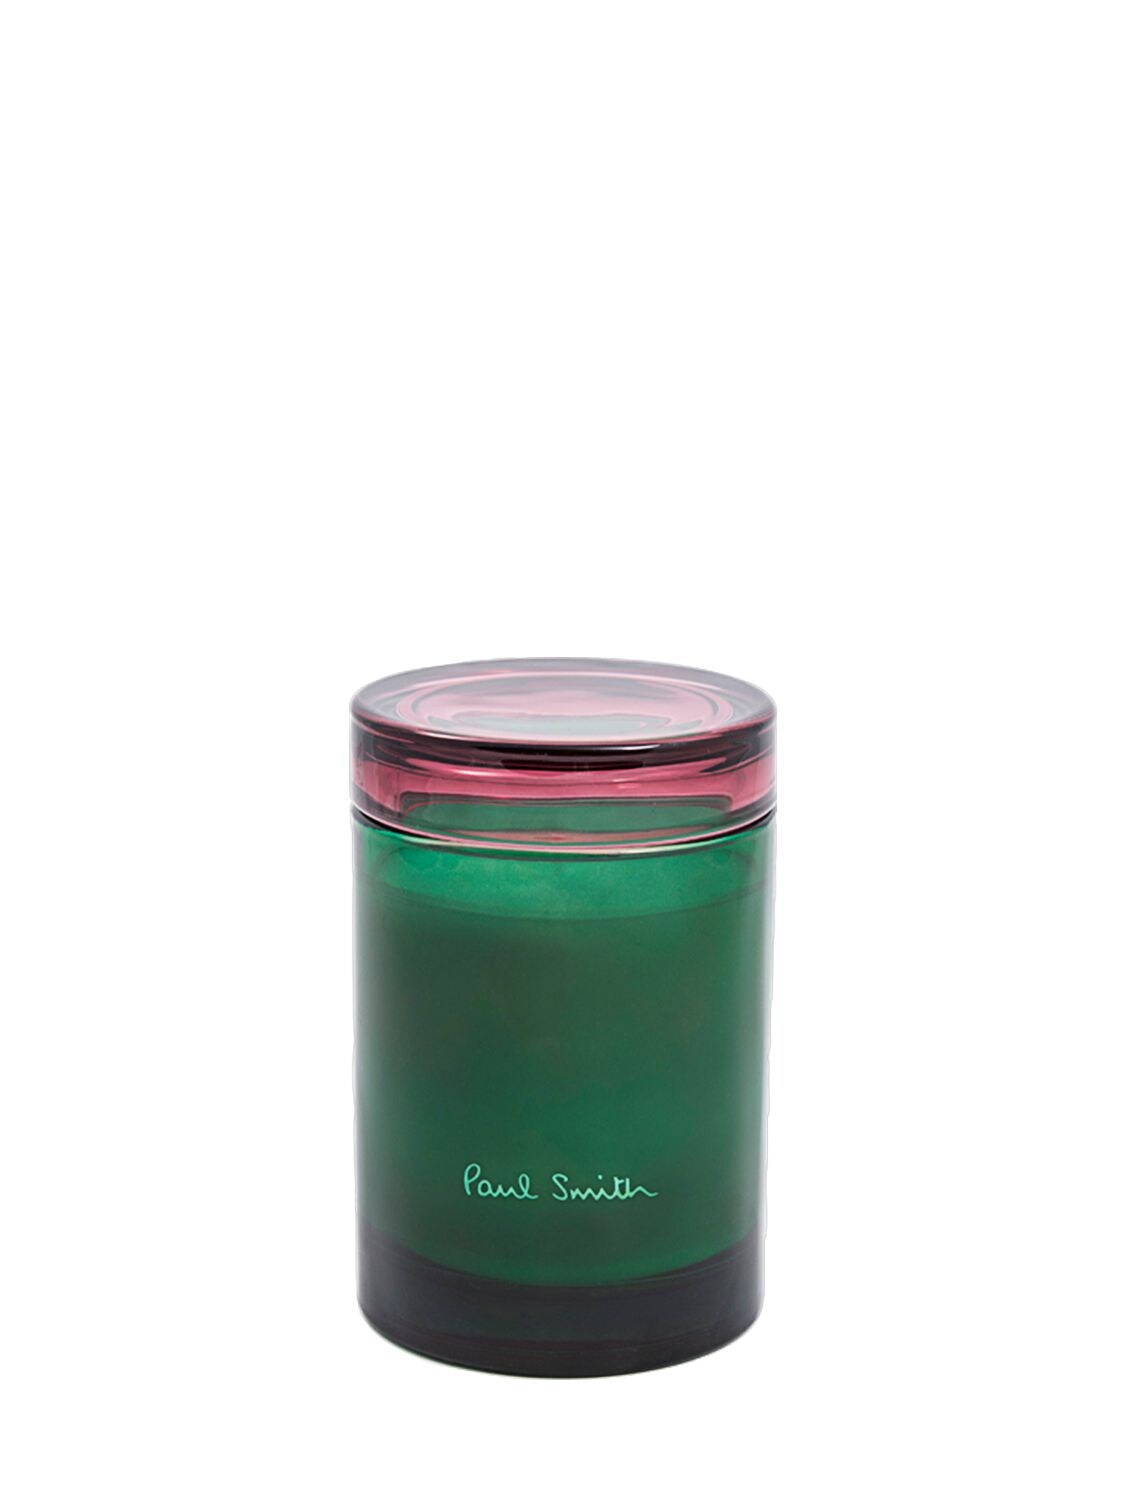 Image of 240gr Paul Smith Green Thumbed Candle